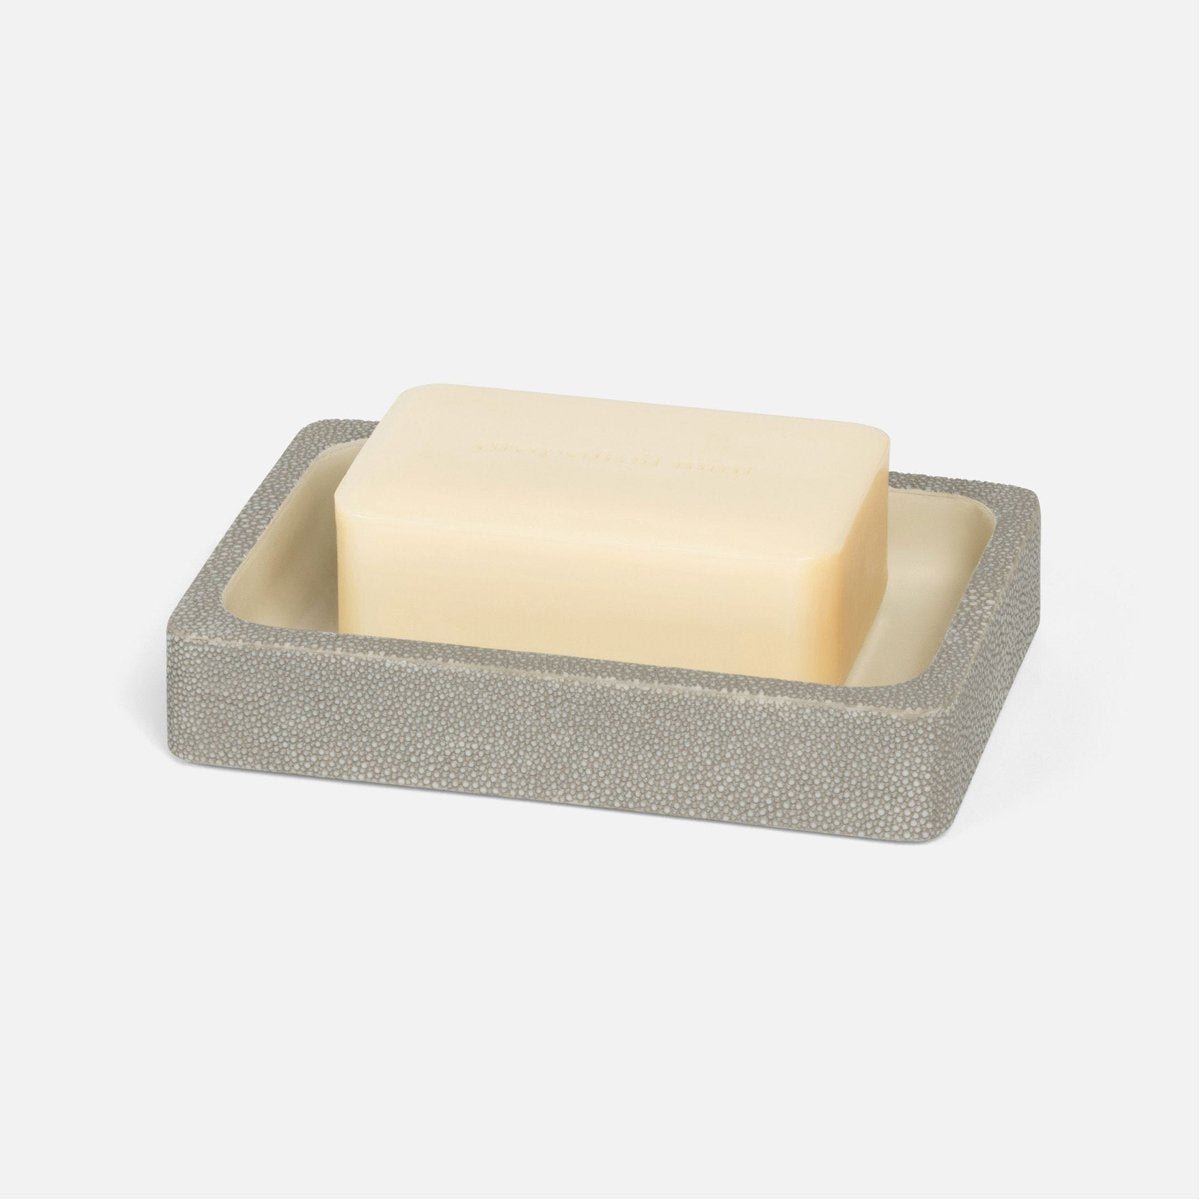 Pigeon and Poodle Tenby Rectangular Soap Dish, Straight